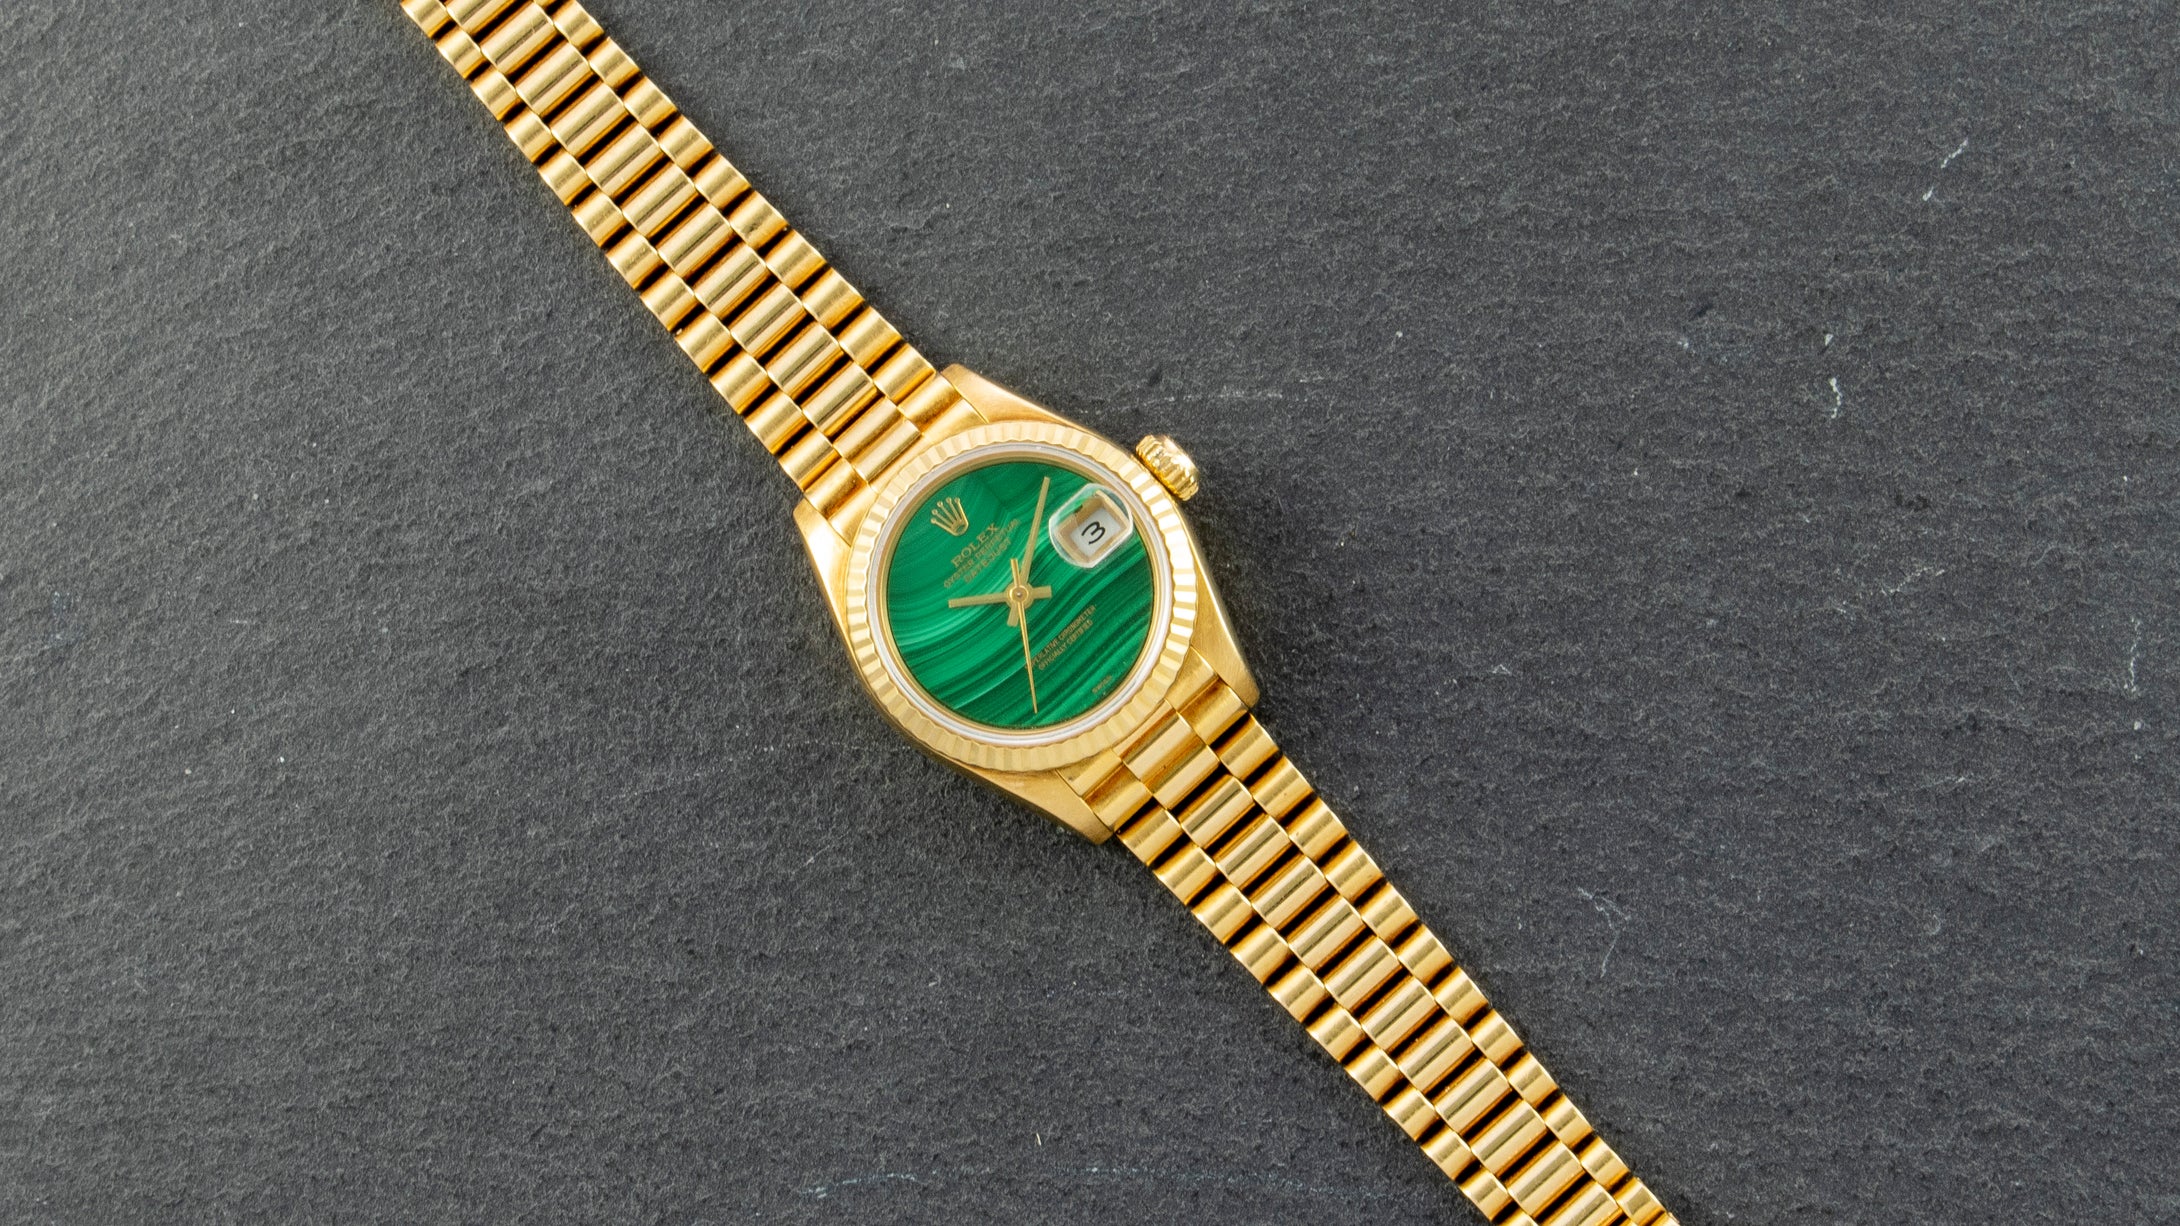 Rolex 18K Yellow Gold Ladies Oyster Perpetual Datejust Vintage Watch with Factory Malachite Dial | Veralet